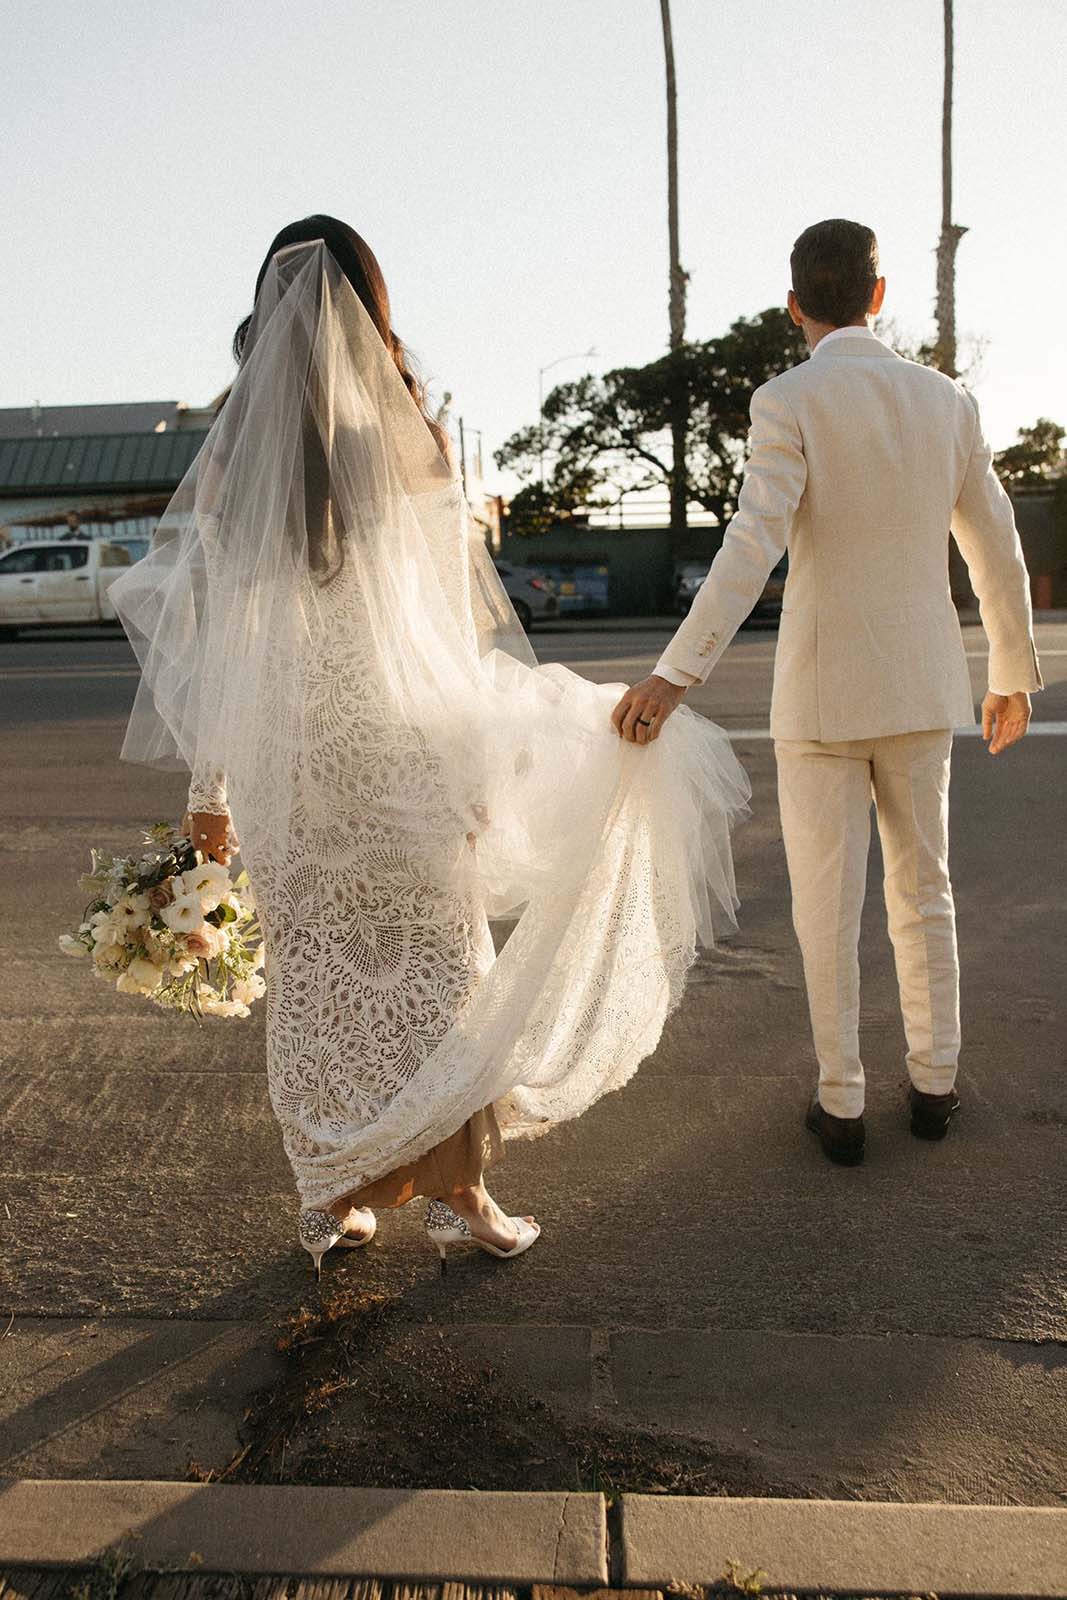 Bride and groom together in local town in Mexico